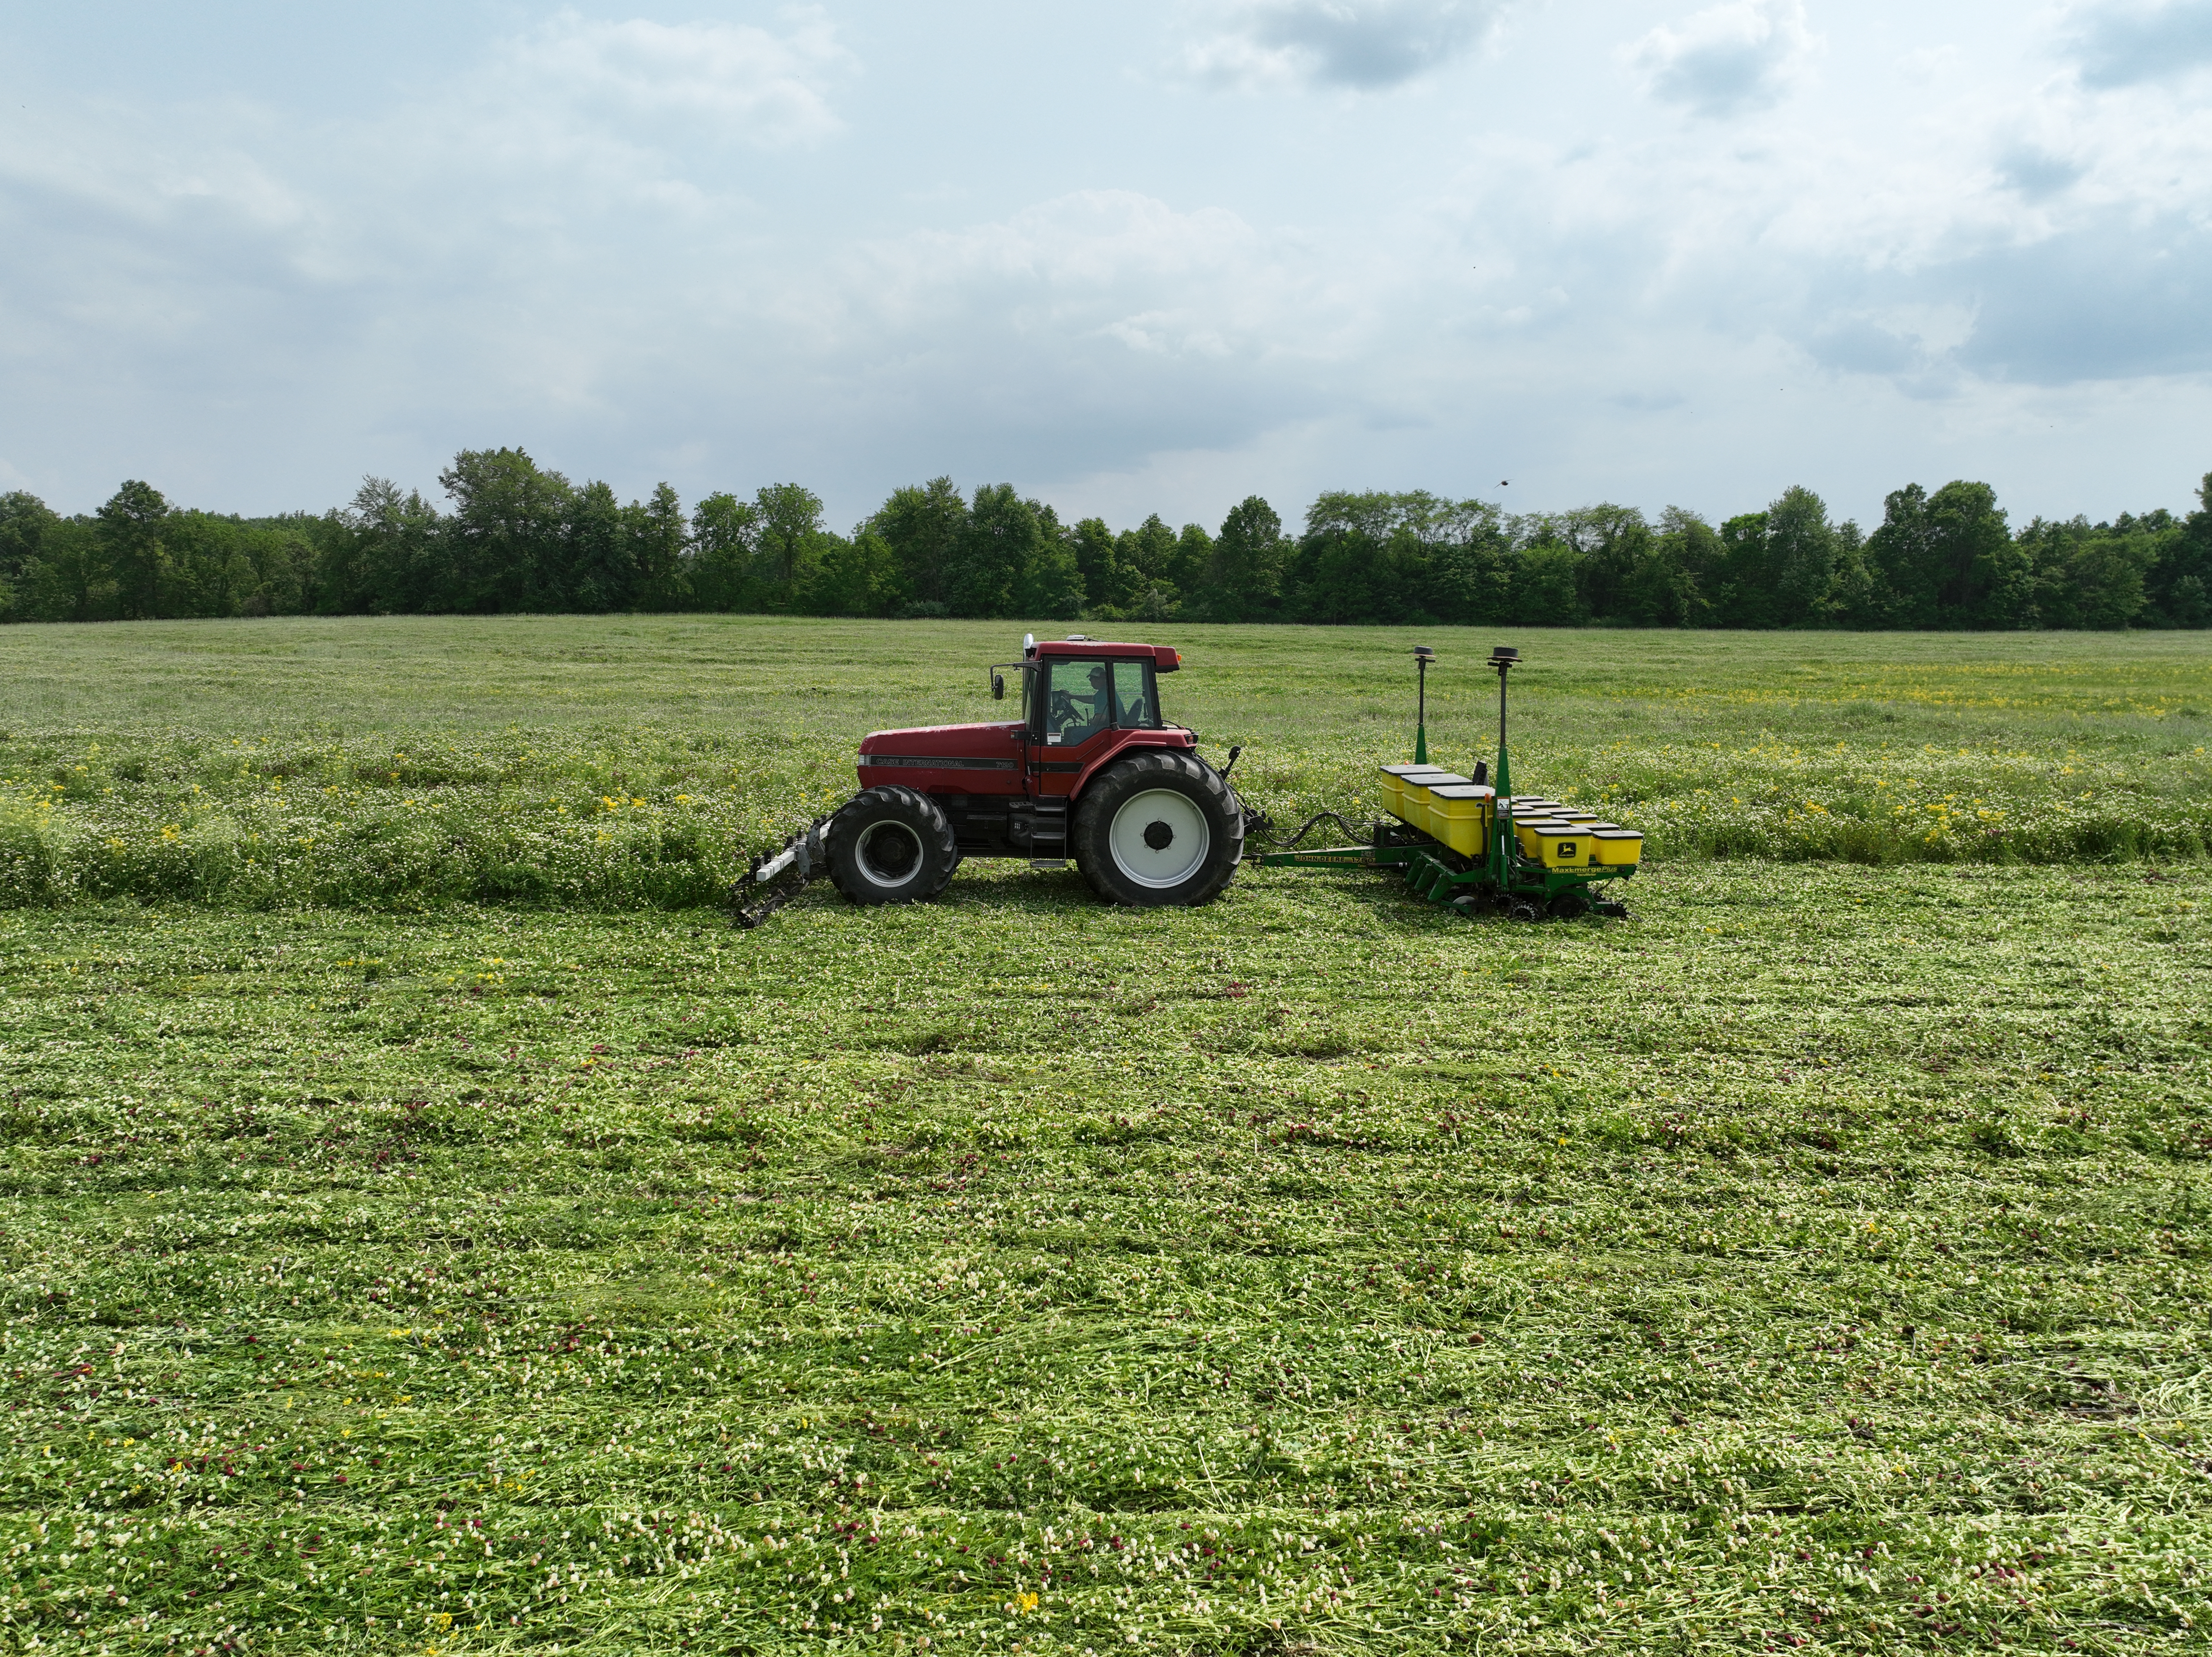 Farmer’s ask: What equipment is needed for conservation practice changes on my farm?